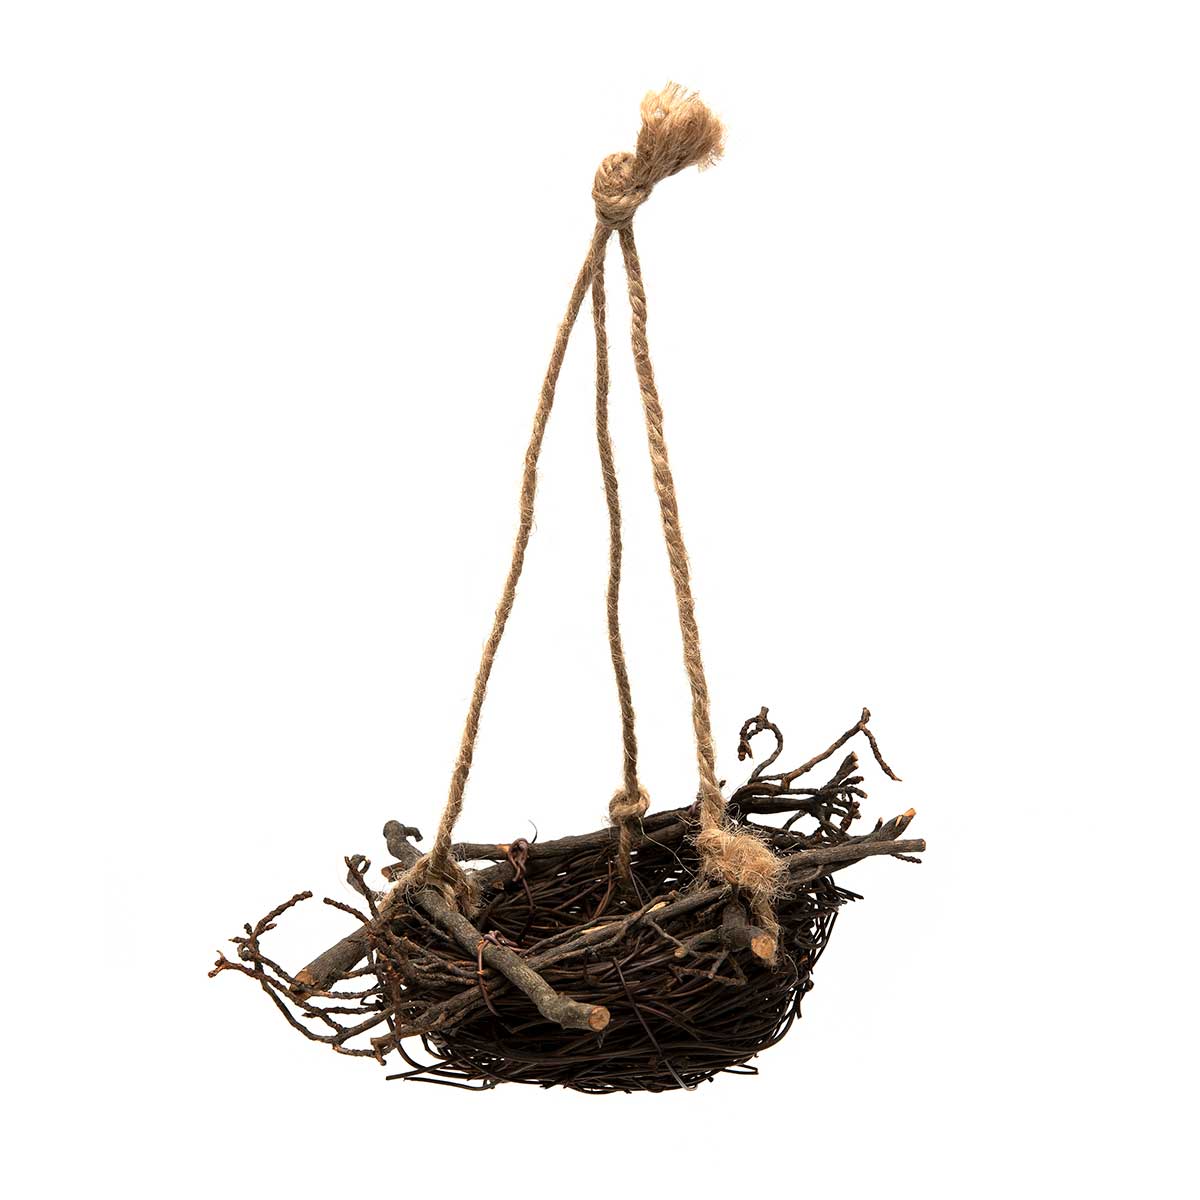 NESTINGS TWIG NEST WITH TWINE HANGER LARGE 7.5"X2.5"